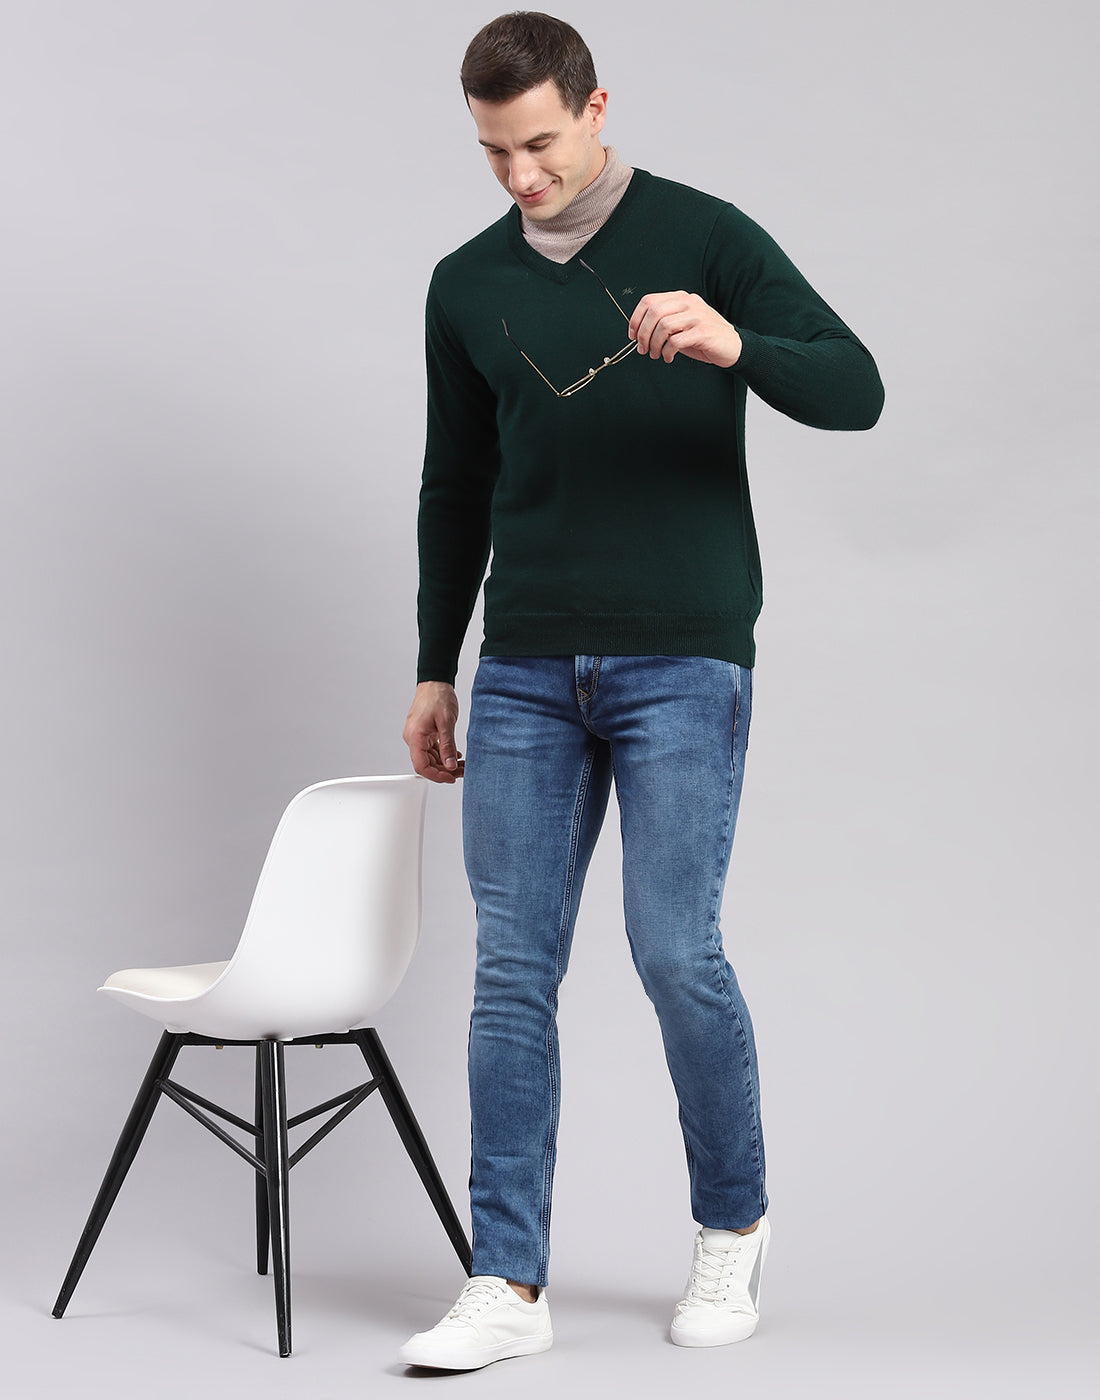 Men Green Solid V Neck Full Sleeve Sweaters/Pullovers